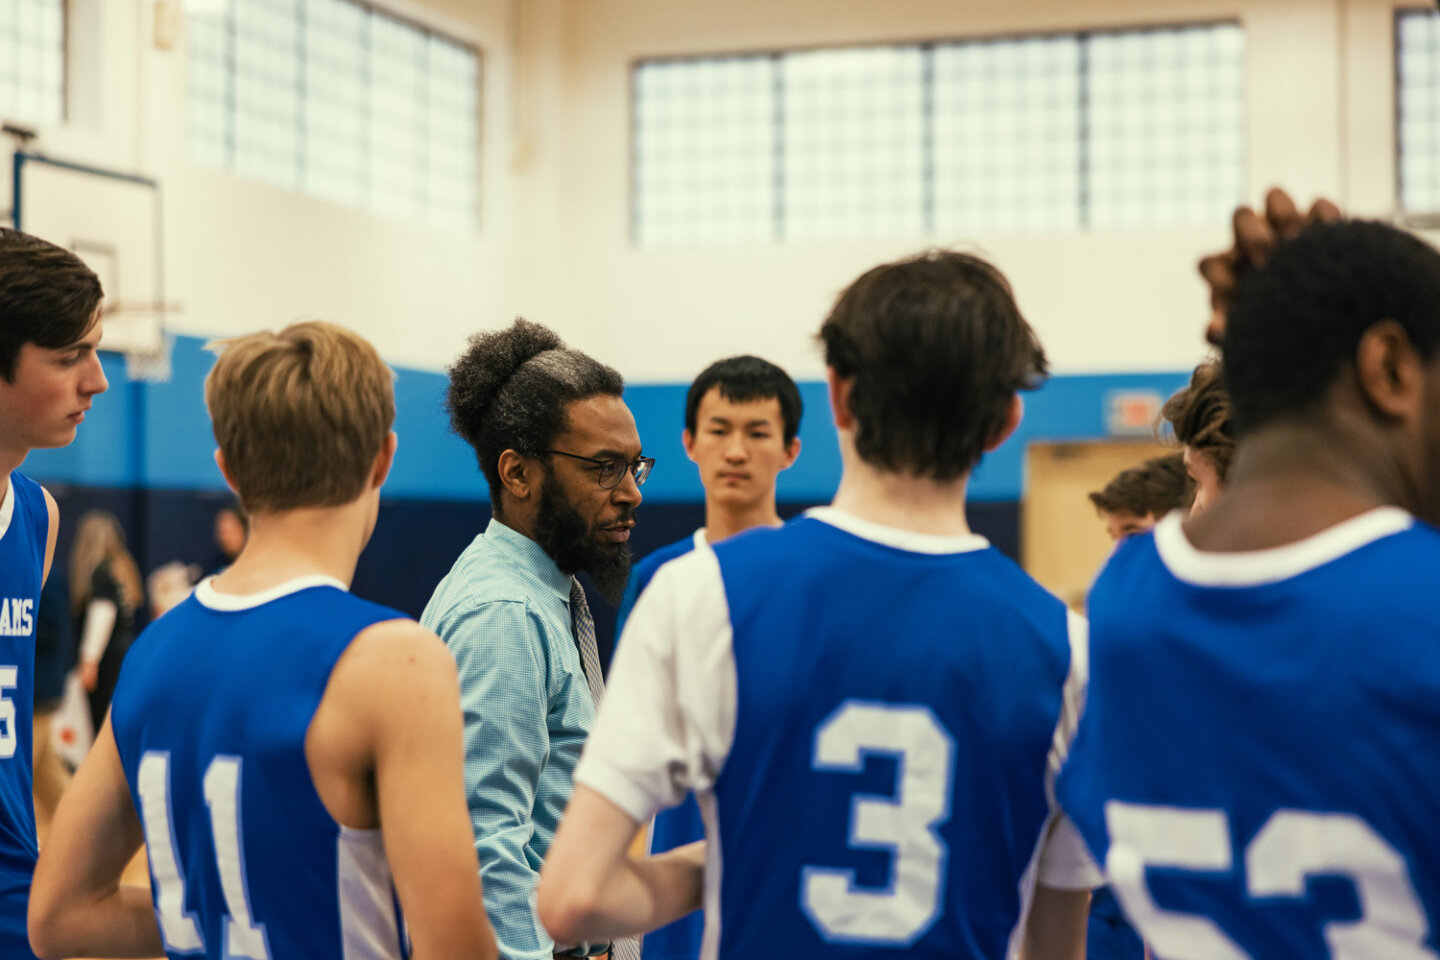 Boys basketball coach talks to players during a game